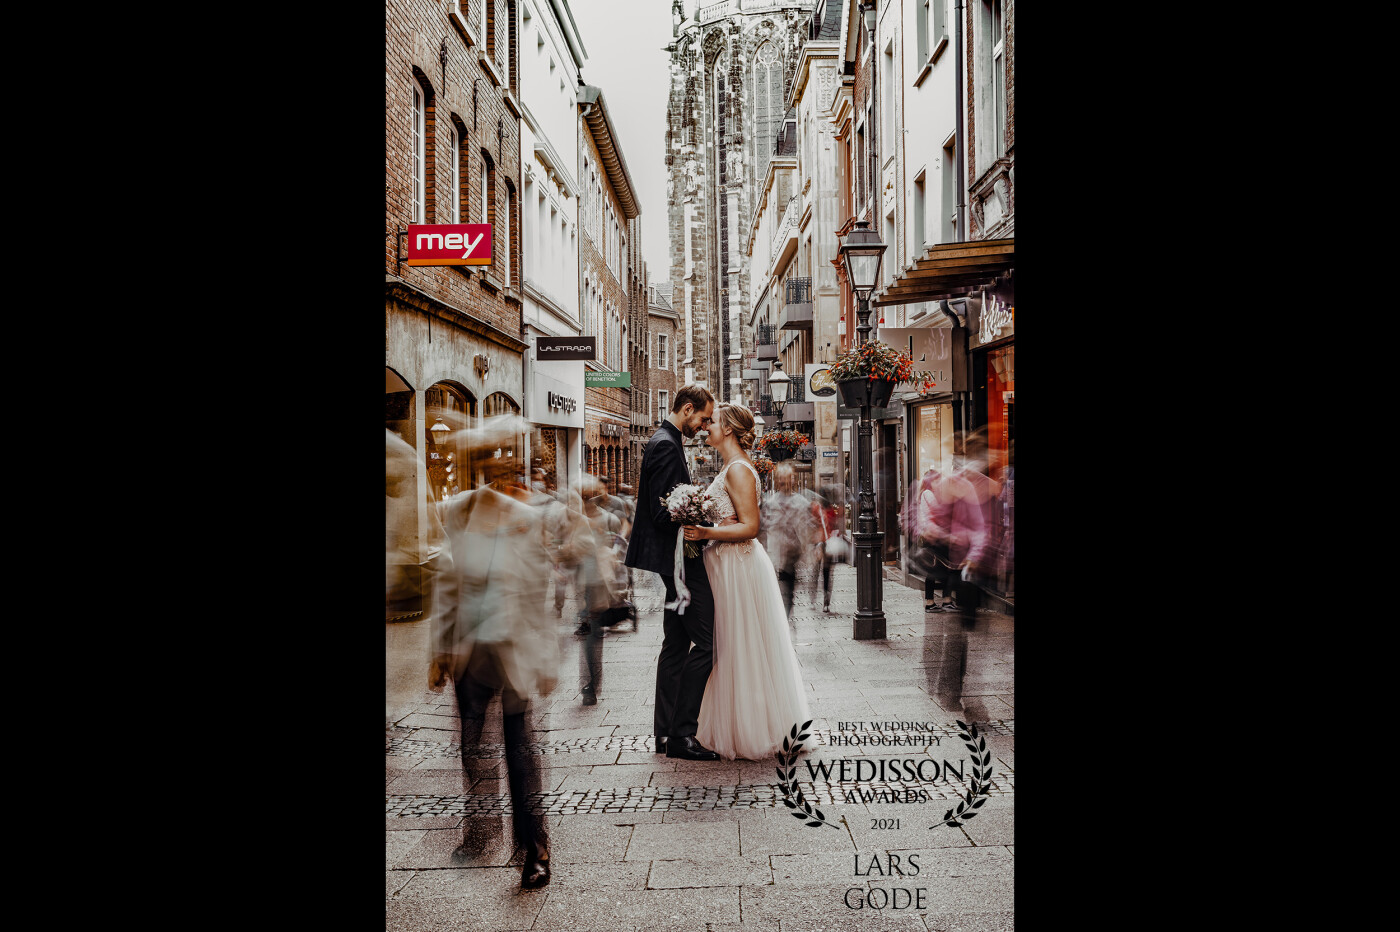 Love makes time standstill. In the middle of the city center of Aachen, this wedding couple lets time standstill. No matter what happens around them - nothing can distract their love. Maybe another form of lockdown.